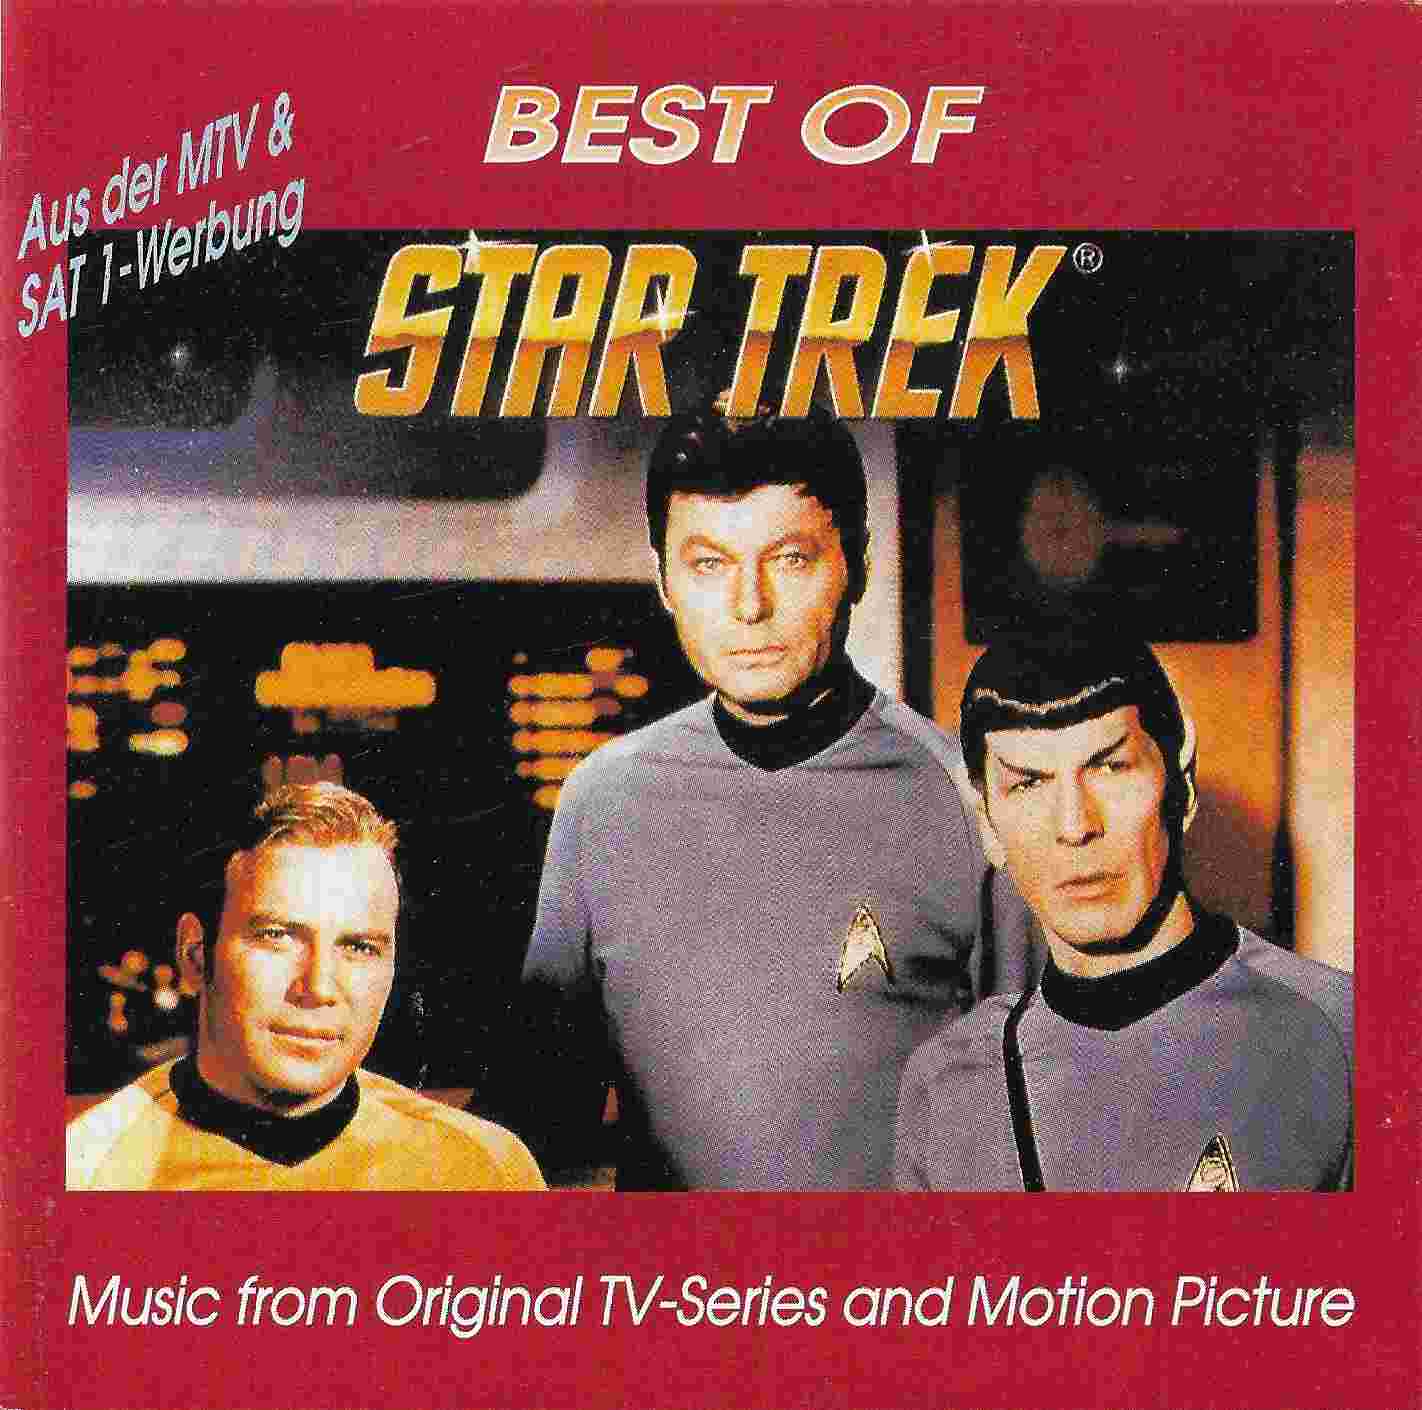 Picture of 2YX 550052 The best of star trek by artist Alexander Courage / Various from the BBC cds - Records and Tapes library